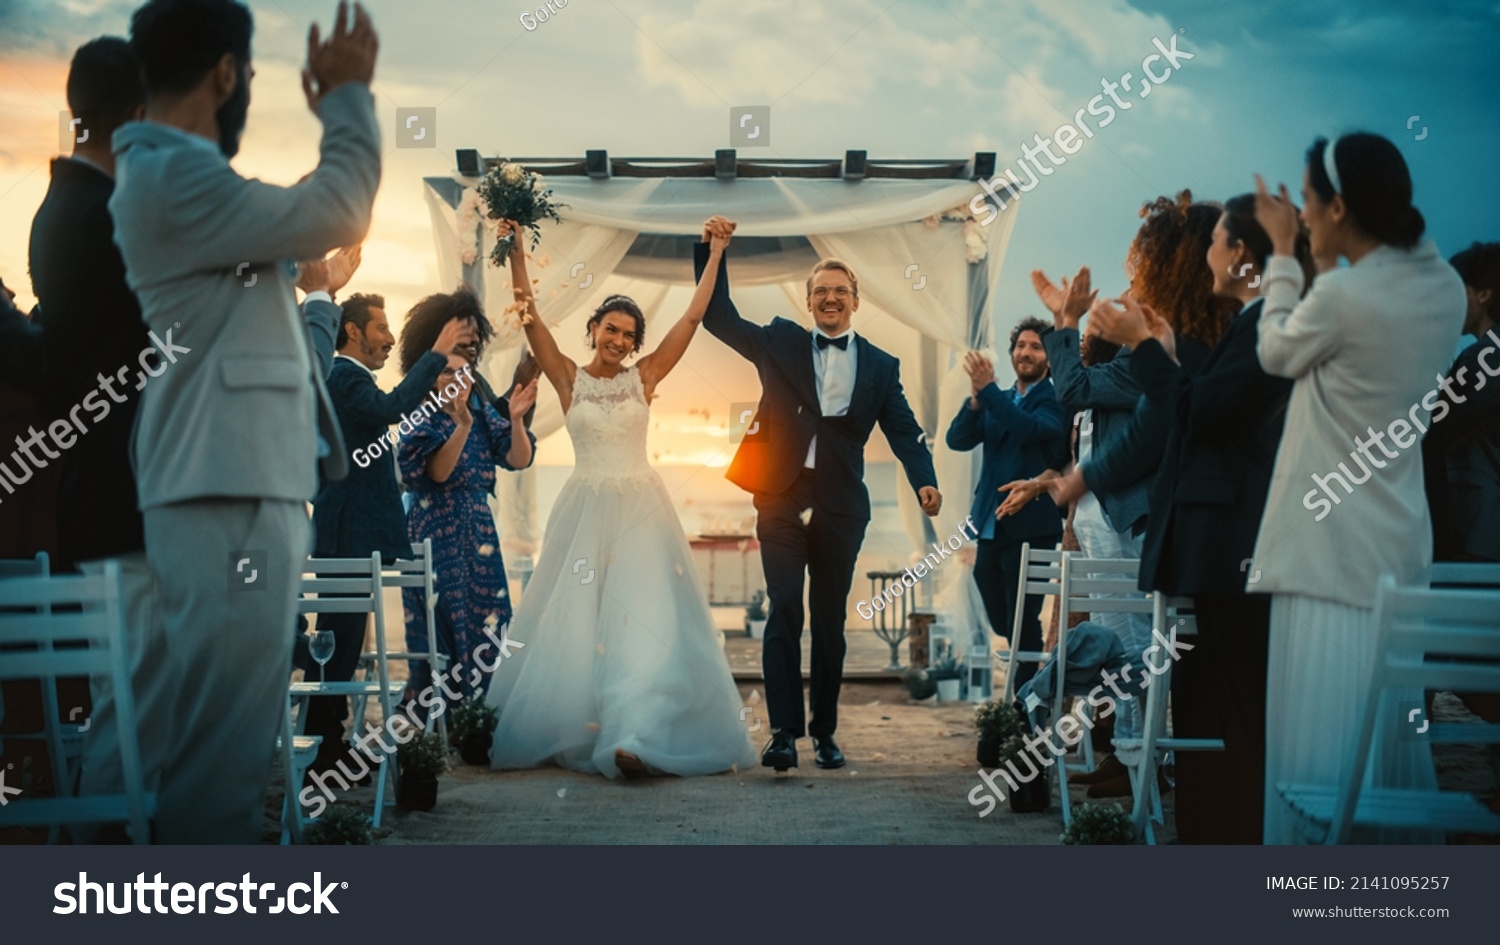 Beautiful Bride and Groom Celebrate Wedding Outdoors on a Beach Near the Ocean at Sunset. Perfect Marriage Venue with Best Multiethnic Diverse Friends Throwing Flower Petals on the Newlyweds. #2141095257